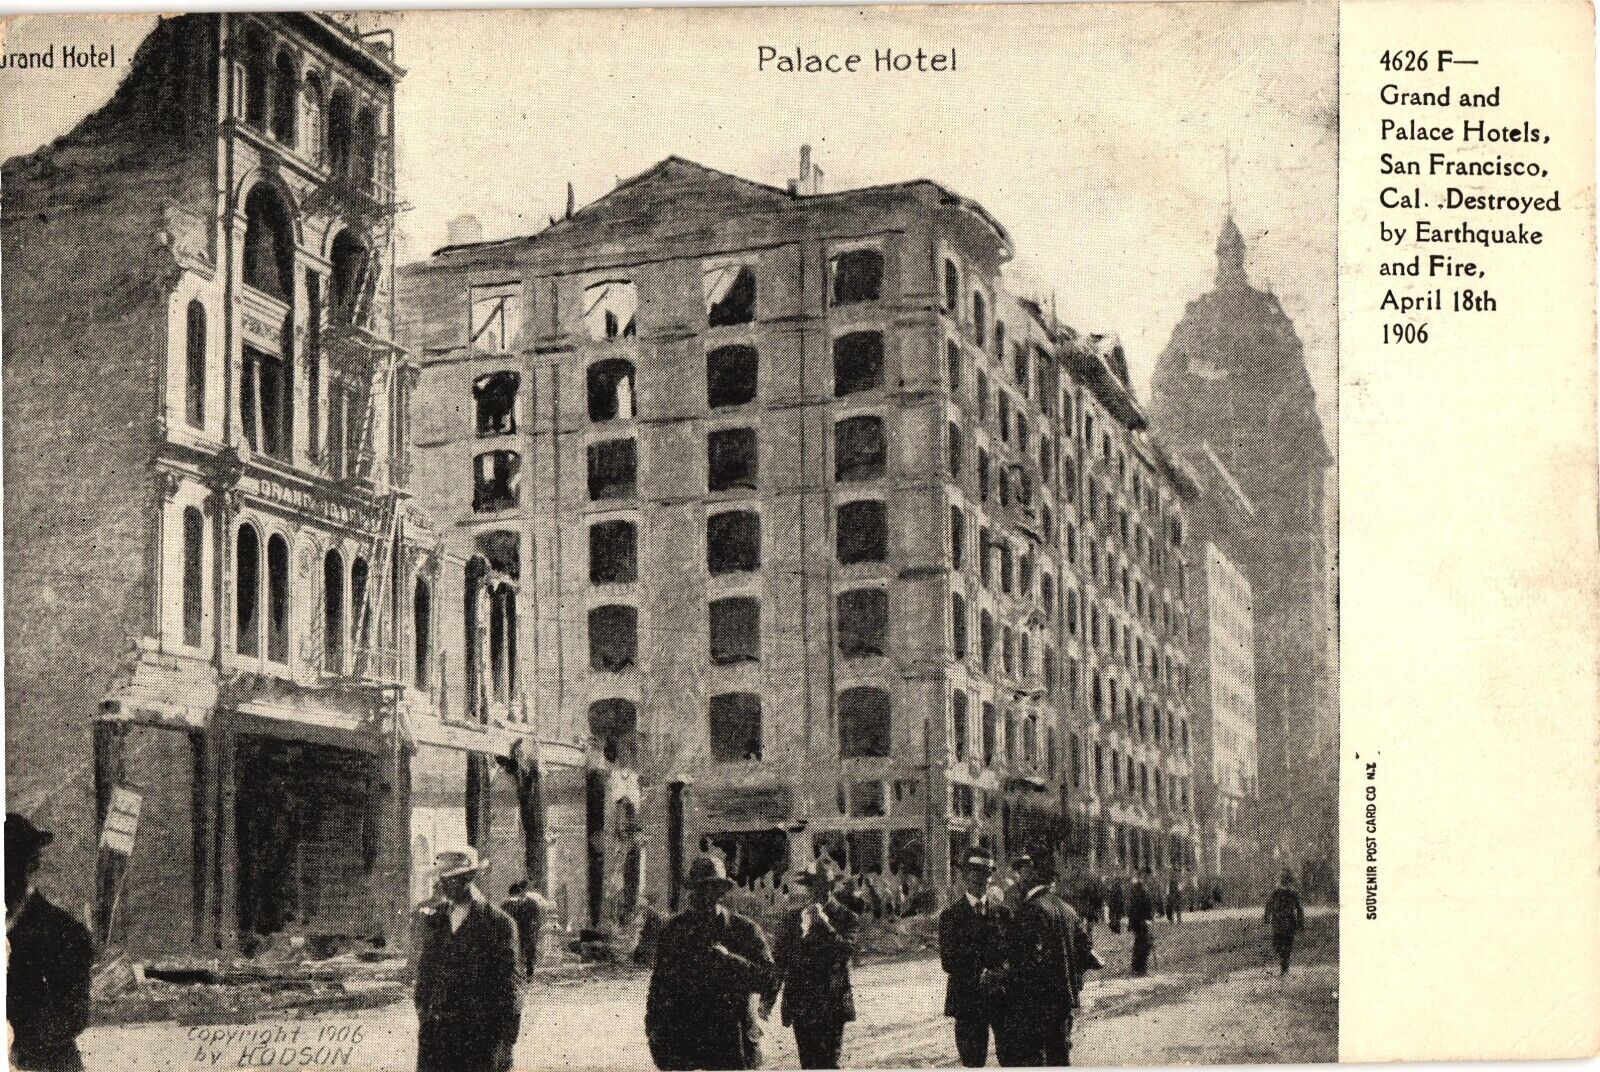 Grand and Palace Hotels Destroyed Earthquake & Fire San Francisco Postcard 1906